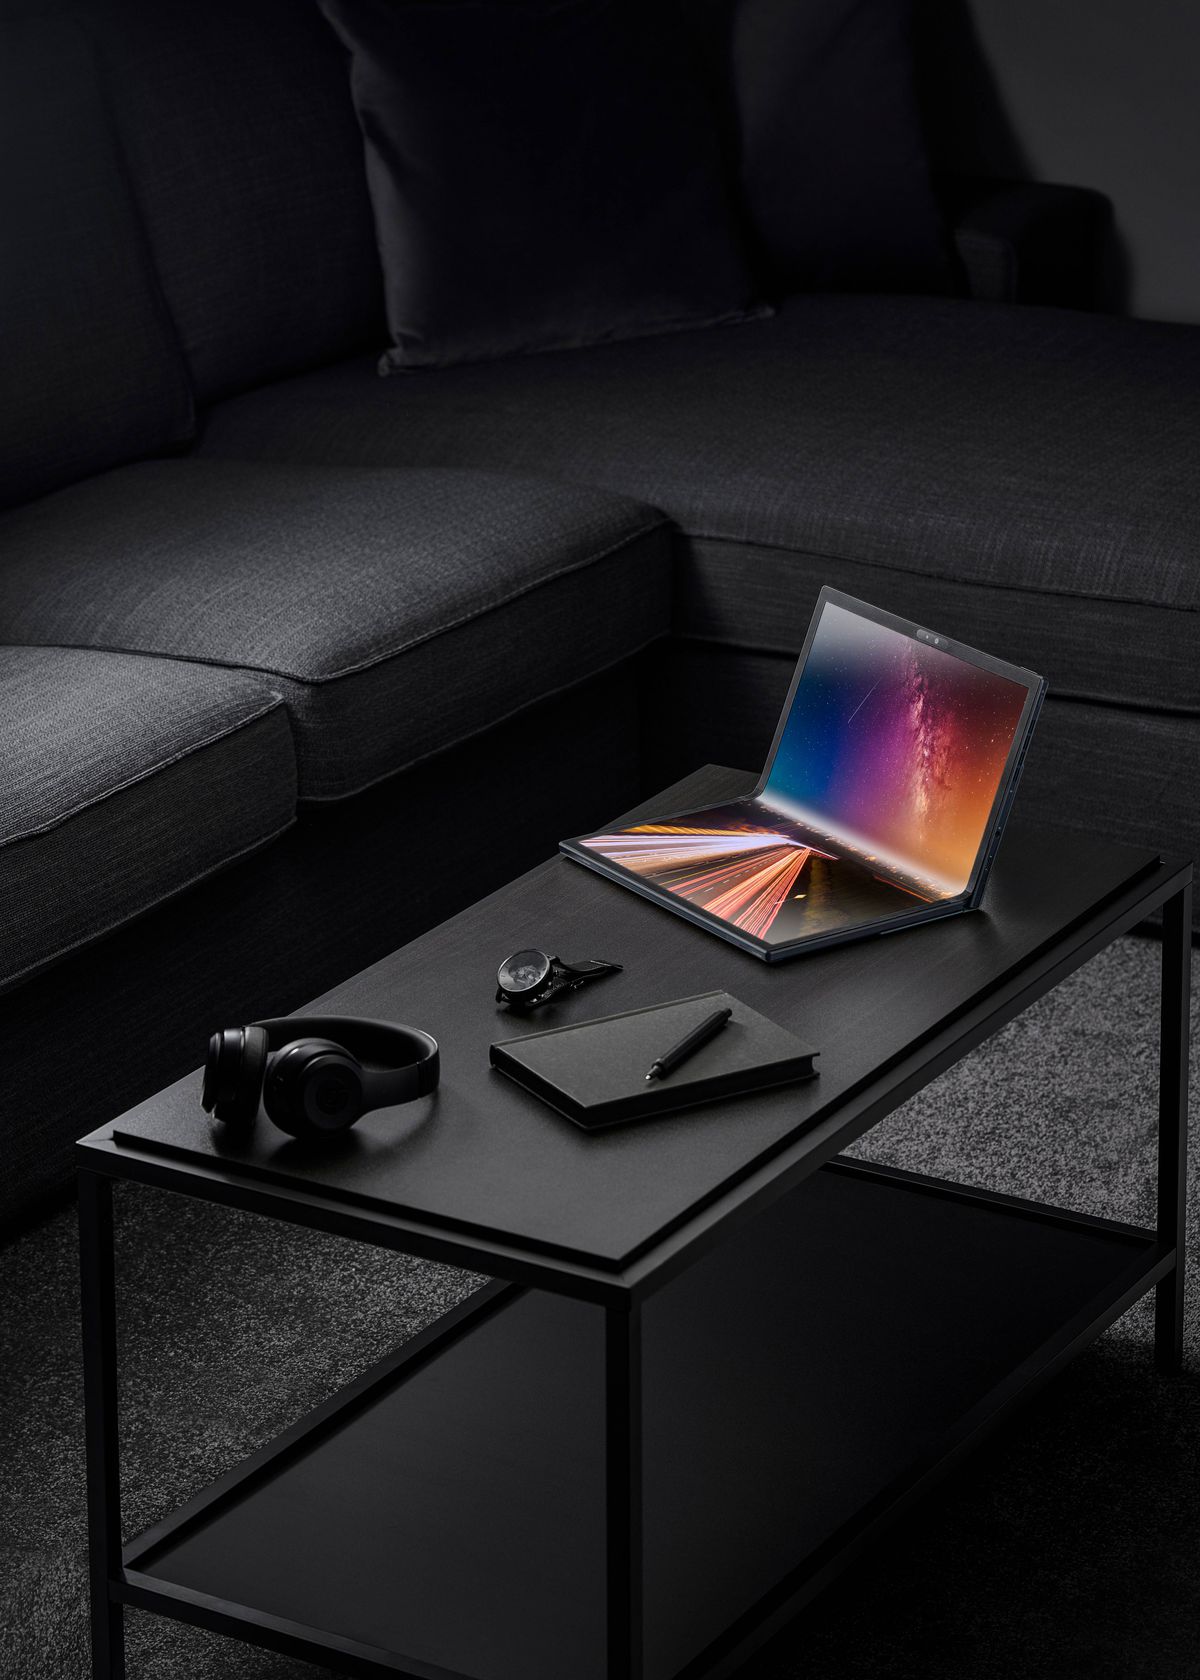 The Asus ZenBook 17 Fold OLED is in clamshell mode on a black coffee table with a black couch behind it.  Next to it is a black watch, a black pair of headphones, and a closed black notebook with a black pen on top.  The screen displays a multicolored background.